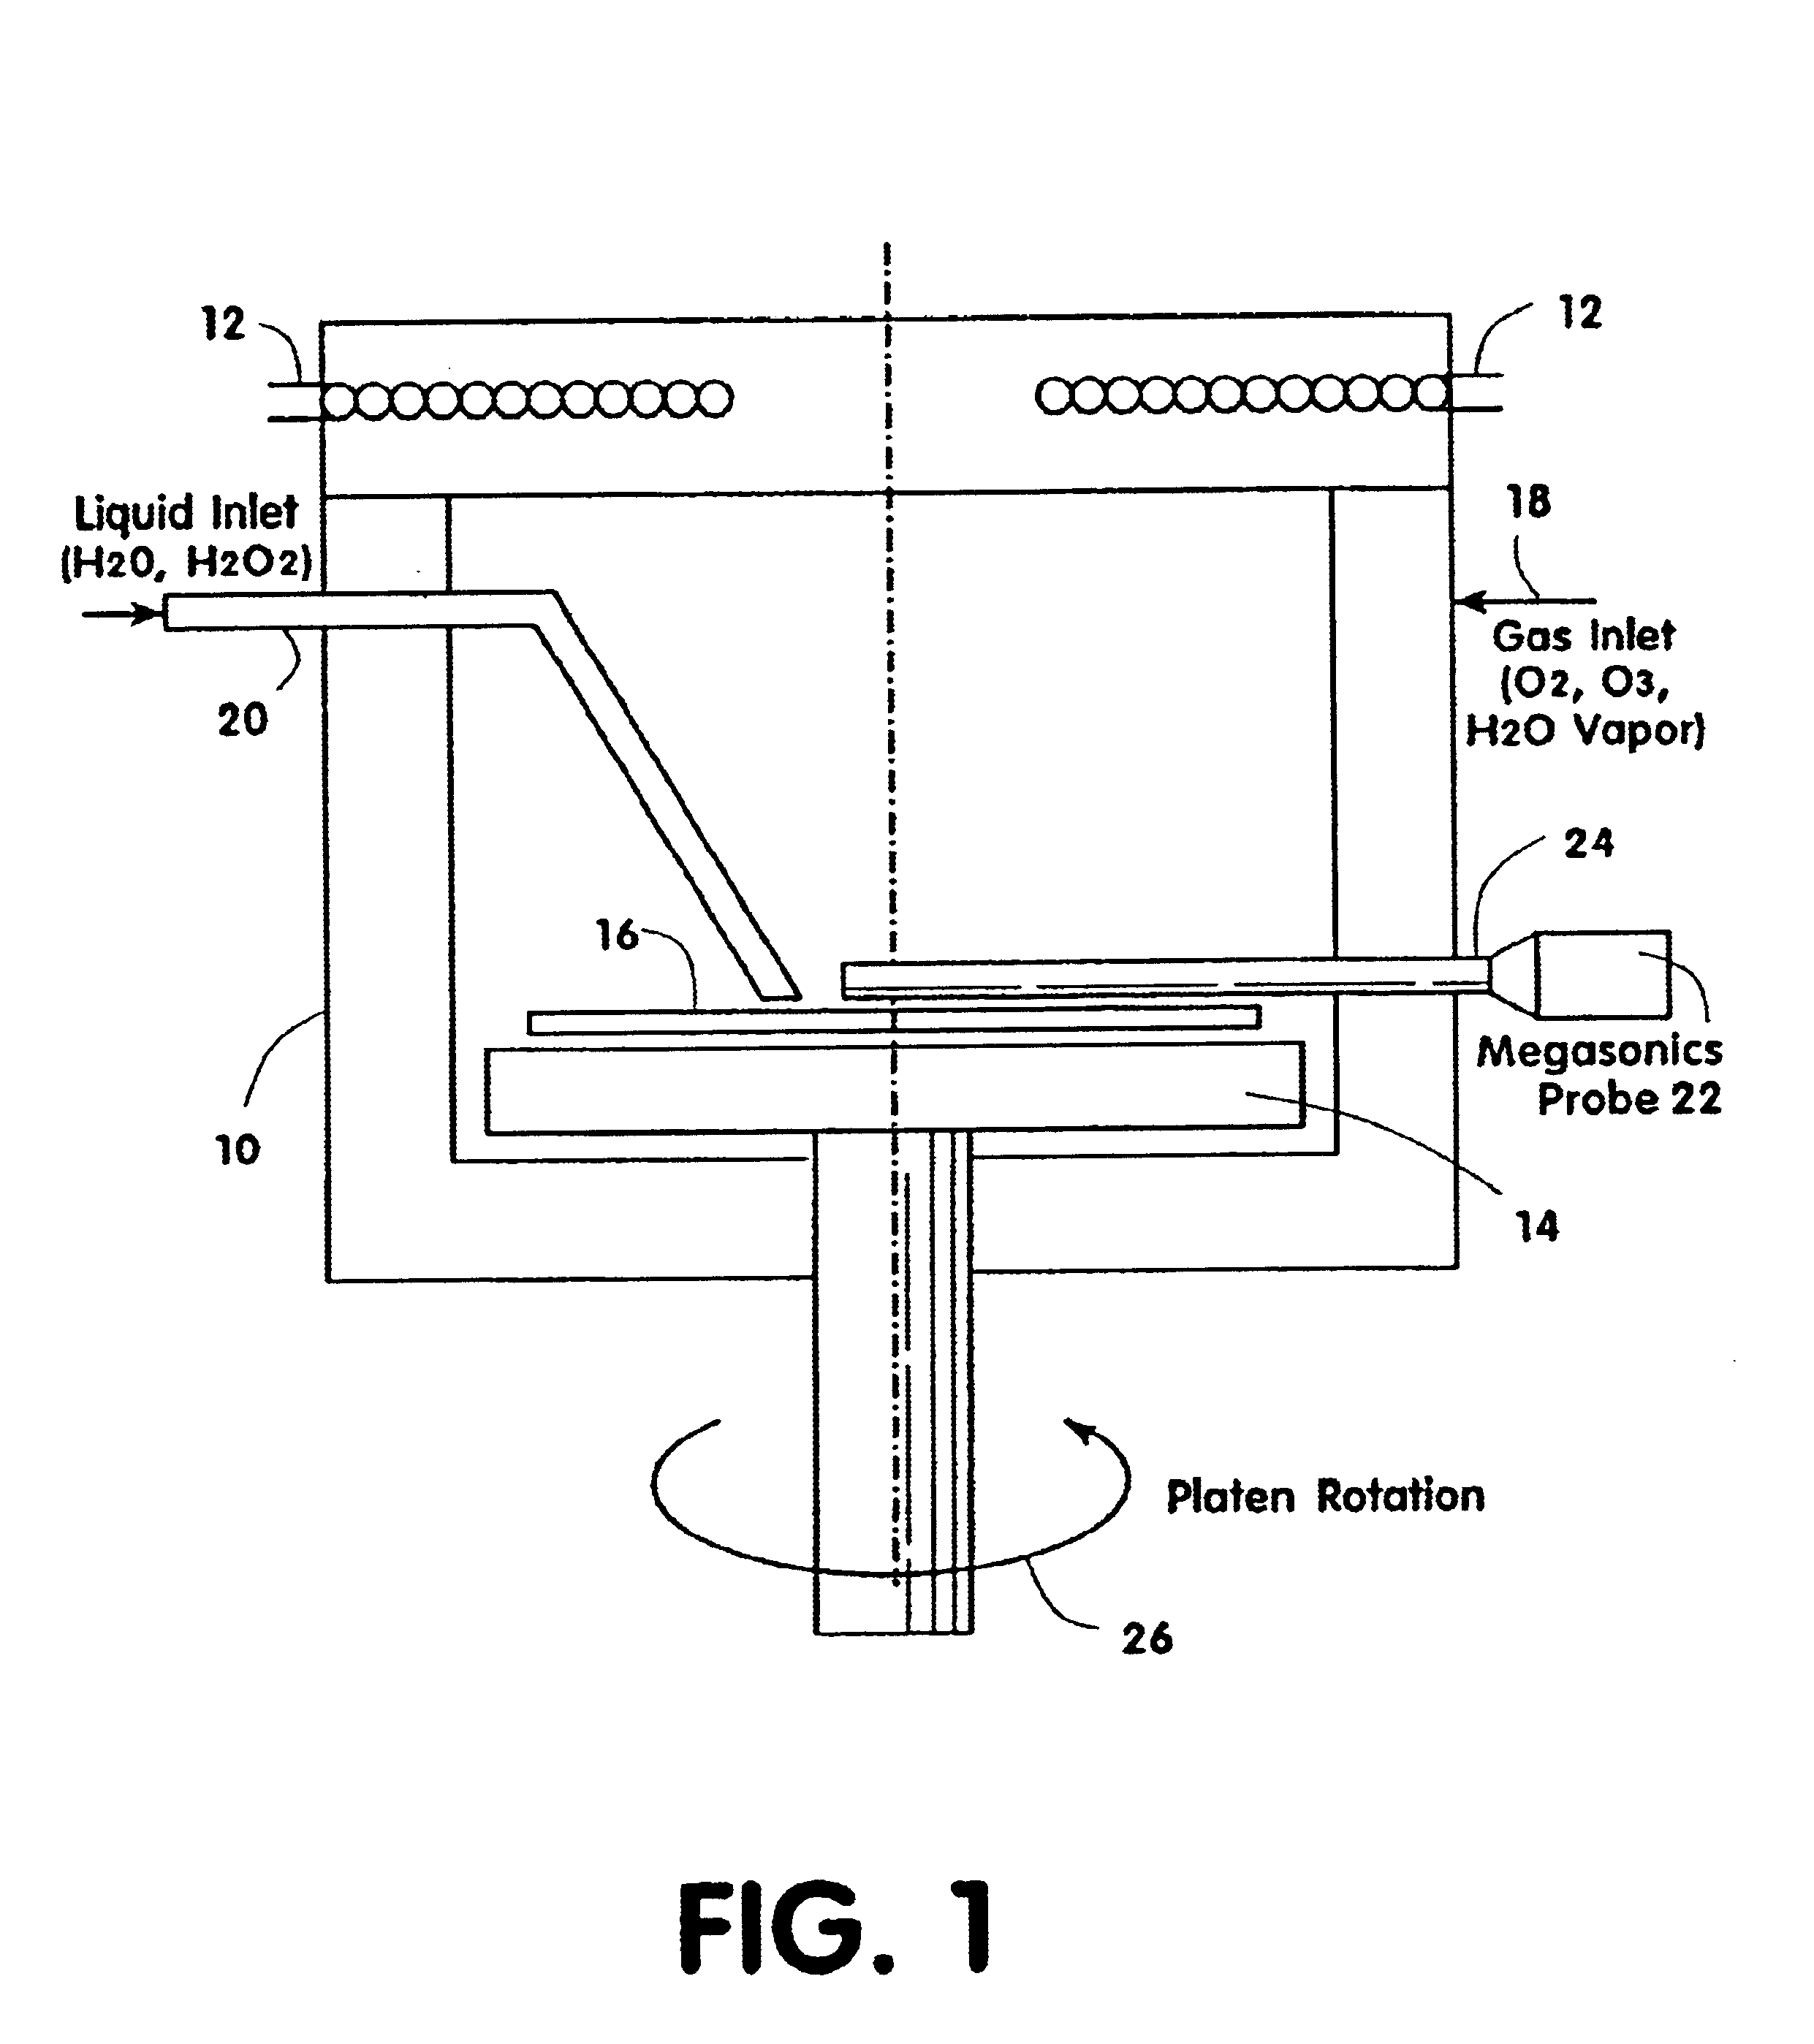 Method and apparatus for removing photoresist and post-etch residue from semiconductor substrates by in-situ generation of oxidizing species